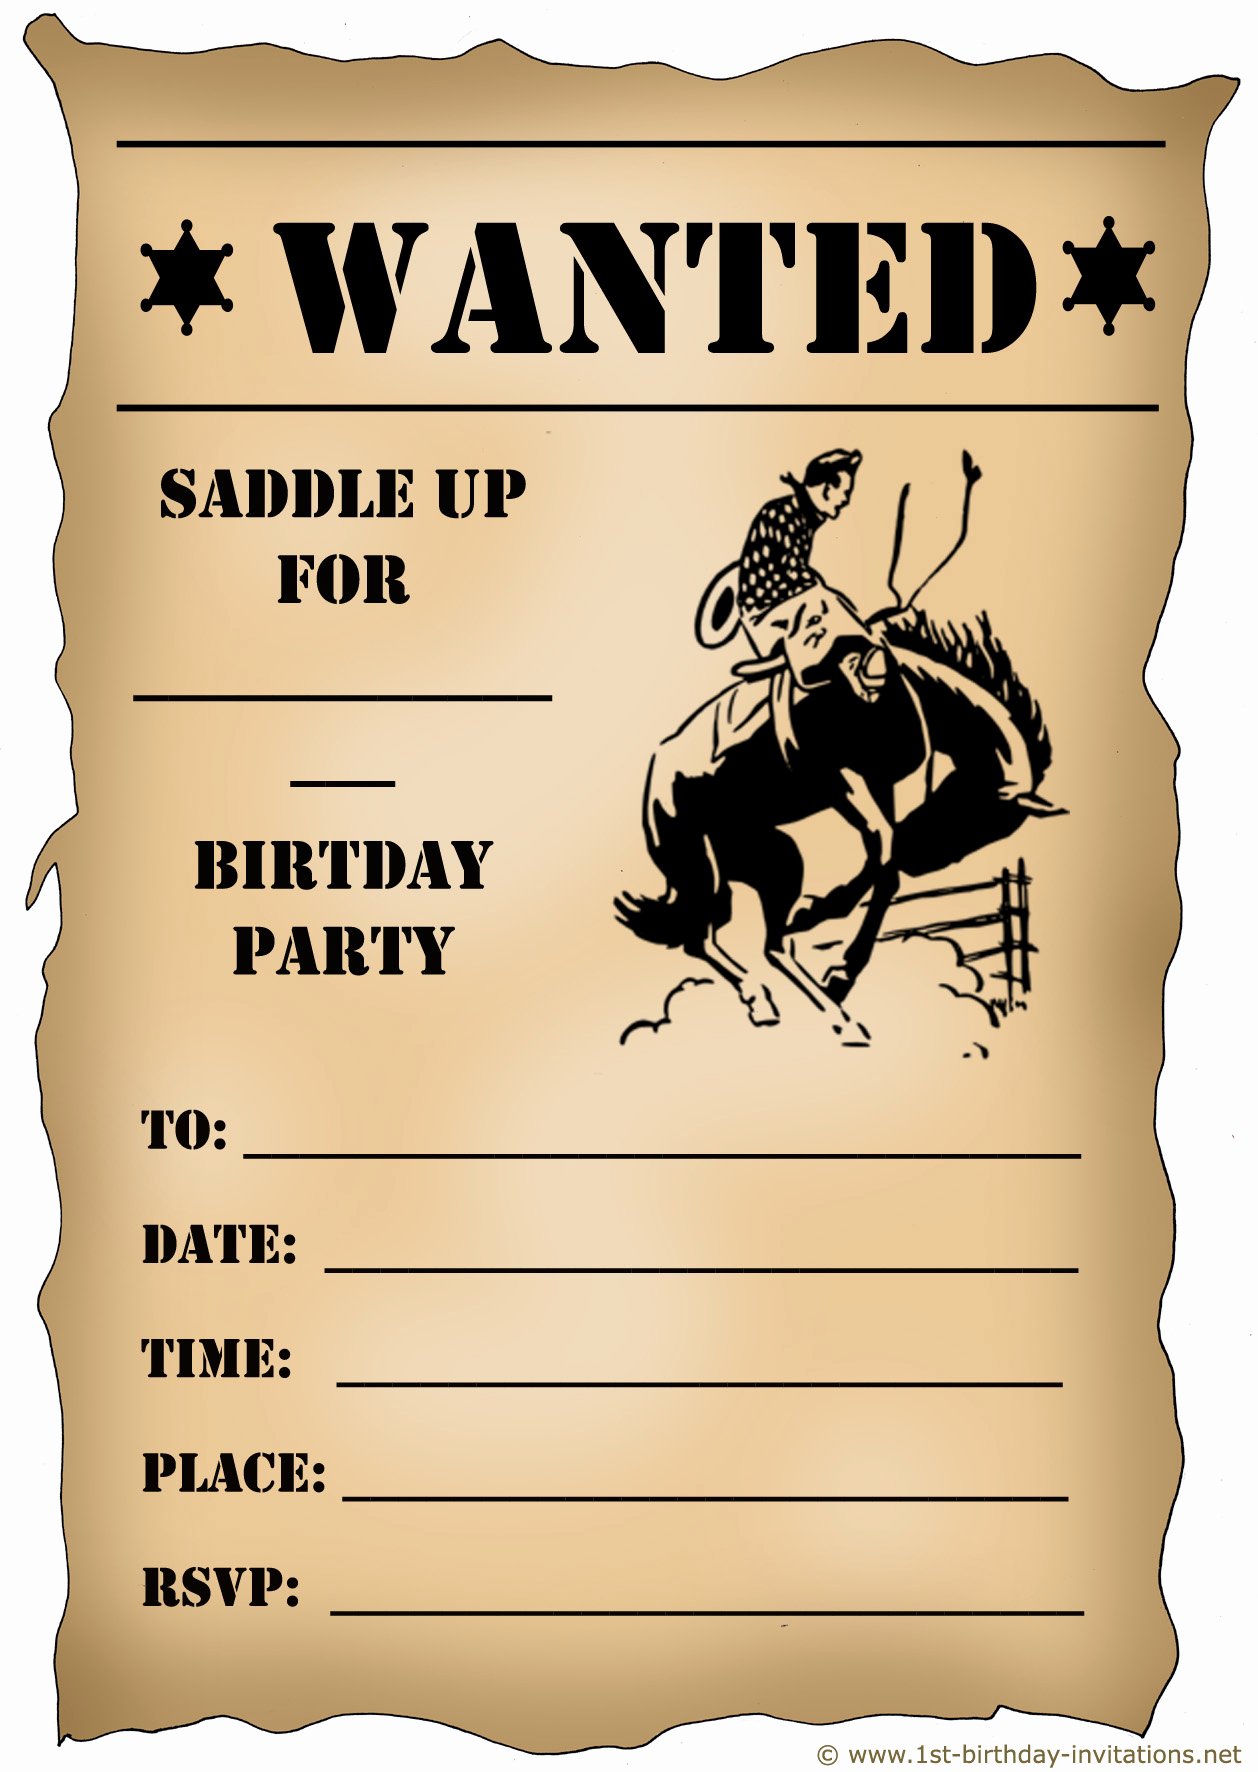 Western Party Invitation Template Beautiful Western Party Invitations Templates